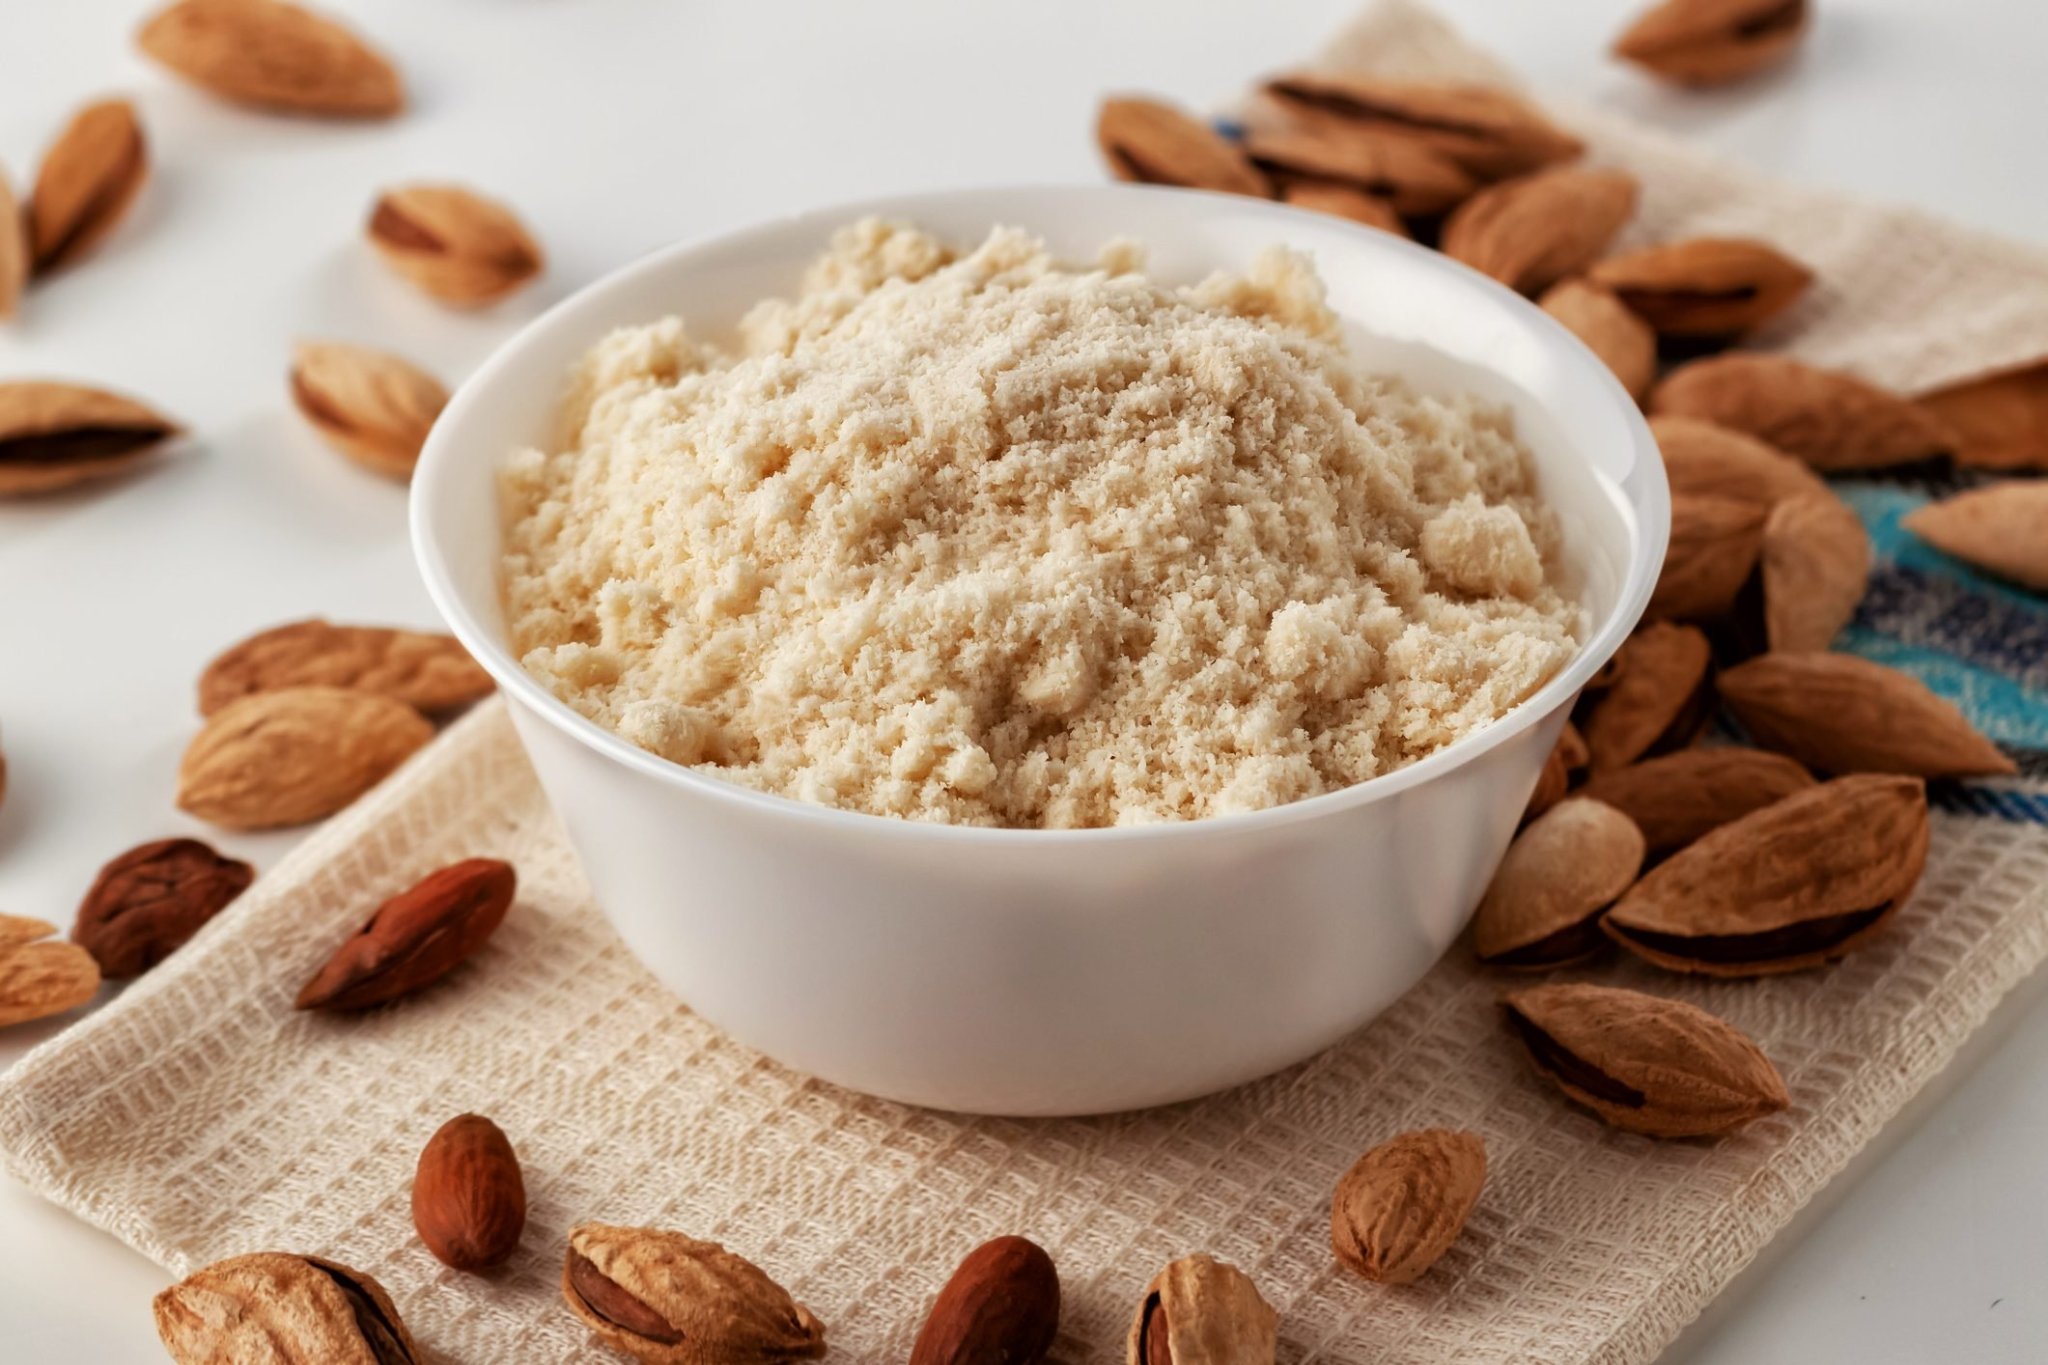 7 Nutrition Facts to Know About Almond Flour, According to a Registered Dietitian